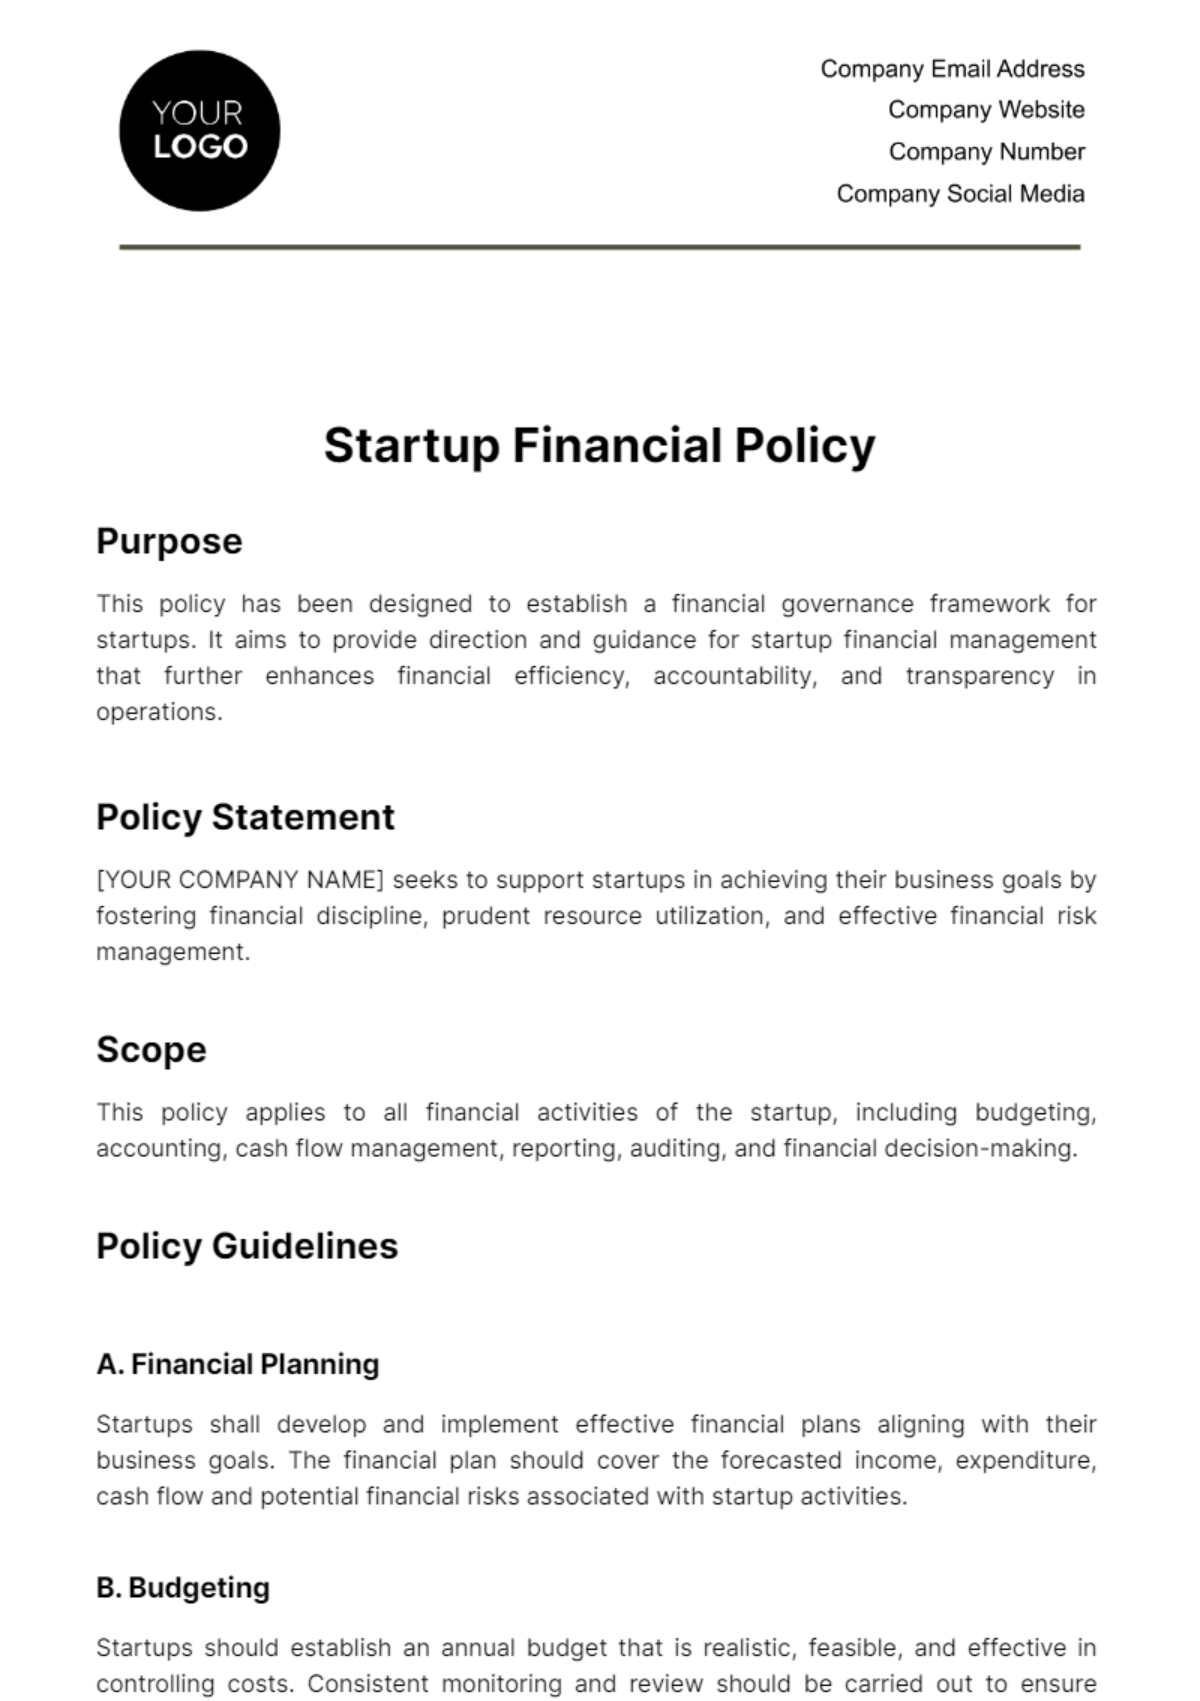 Startup Financial Policy Template